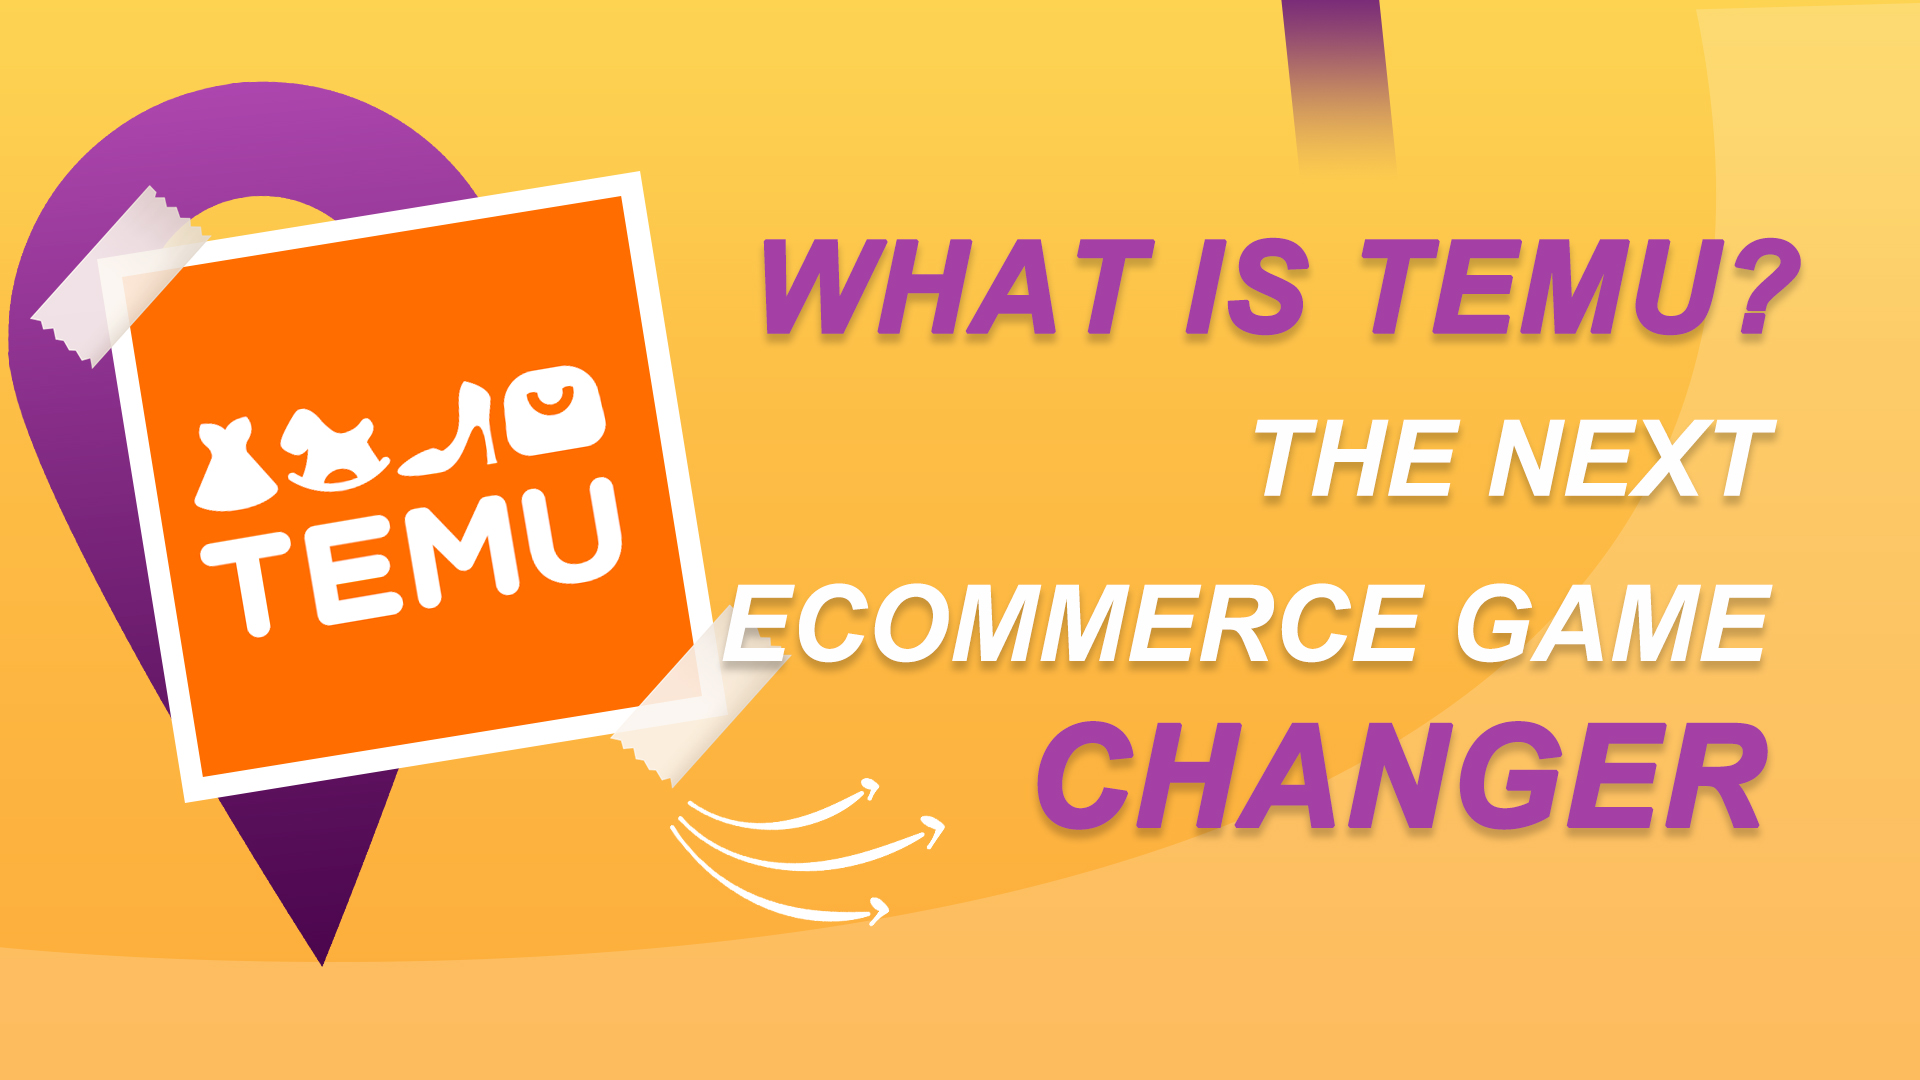 https://cjdropship.com/wp-content/uploads/2022/12/What-is-Temu-The-Next-eCommerce-Game-Changer.jpg